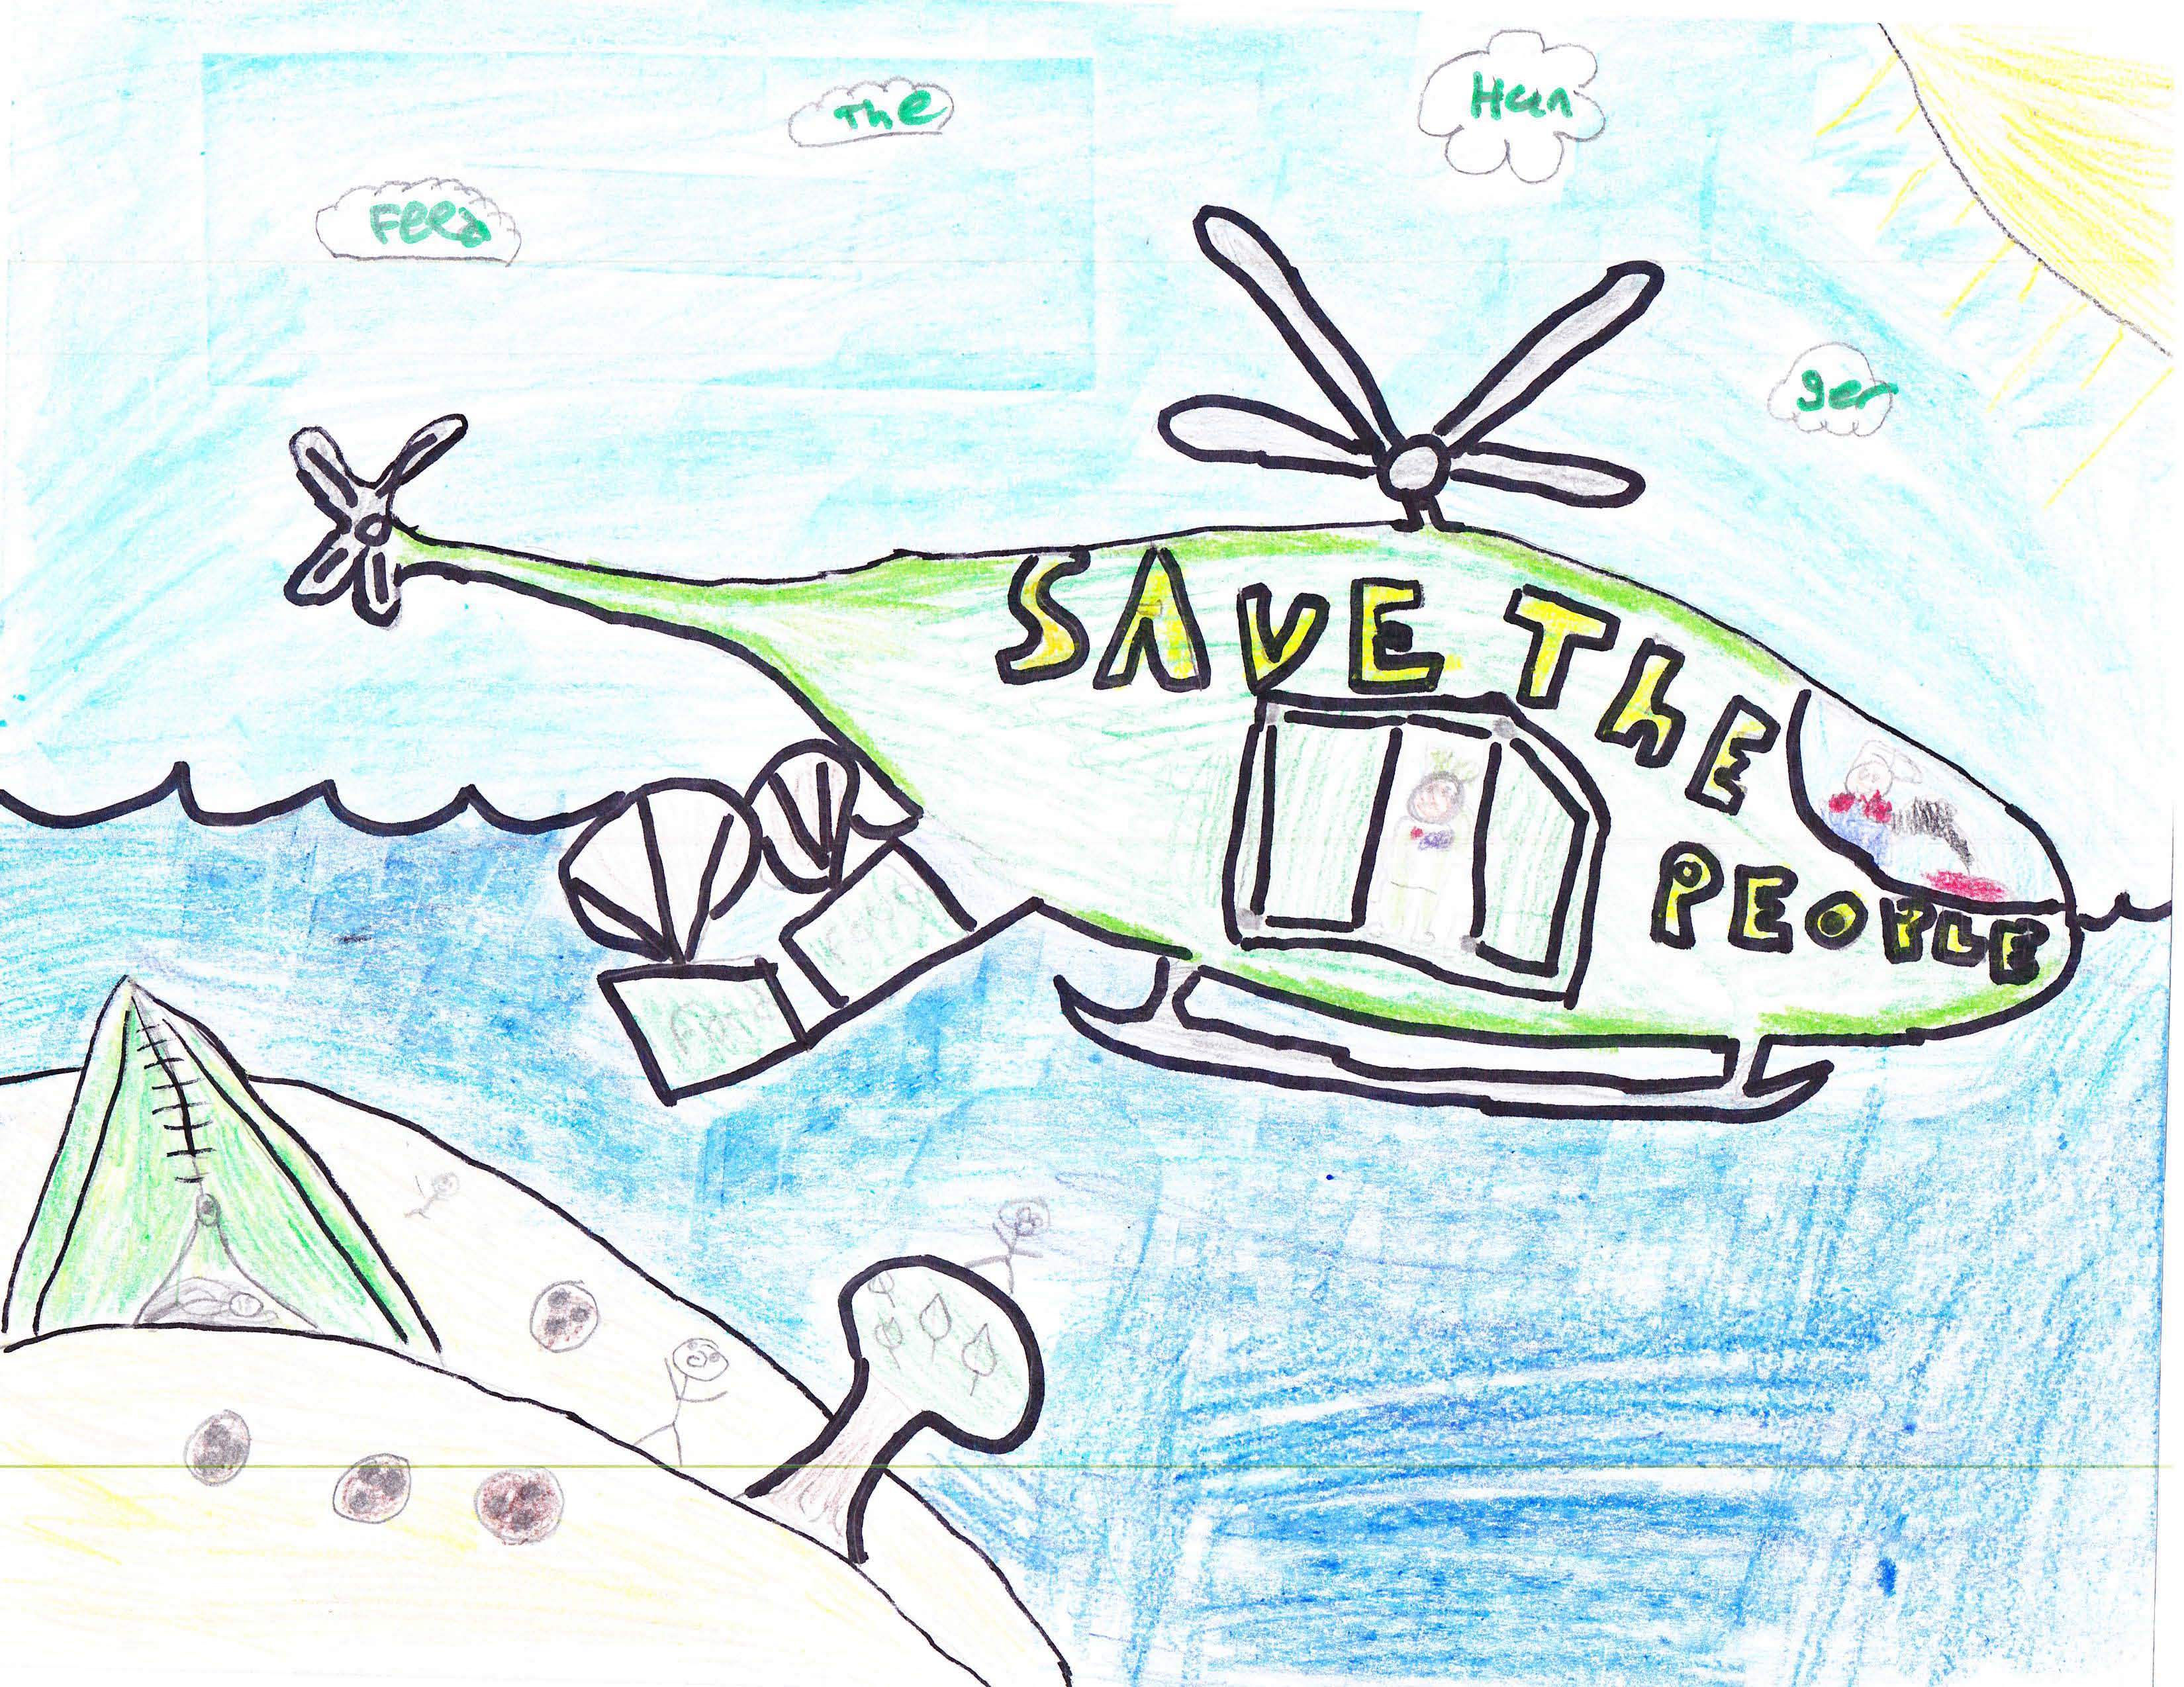 A children's drawing of a helicopter dropping food and supplies to the people below.